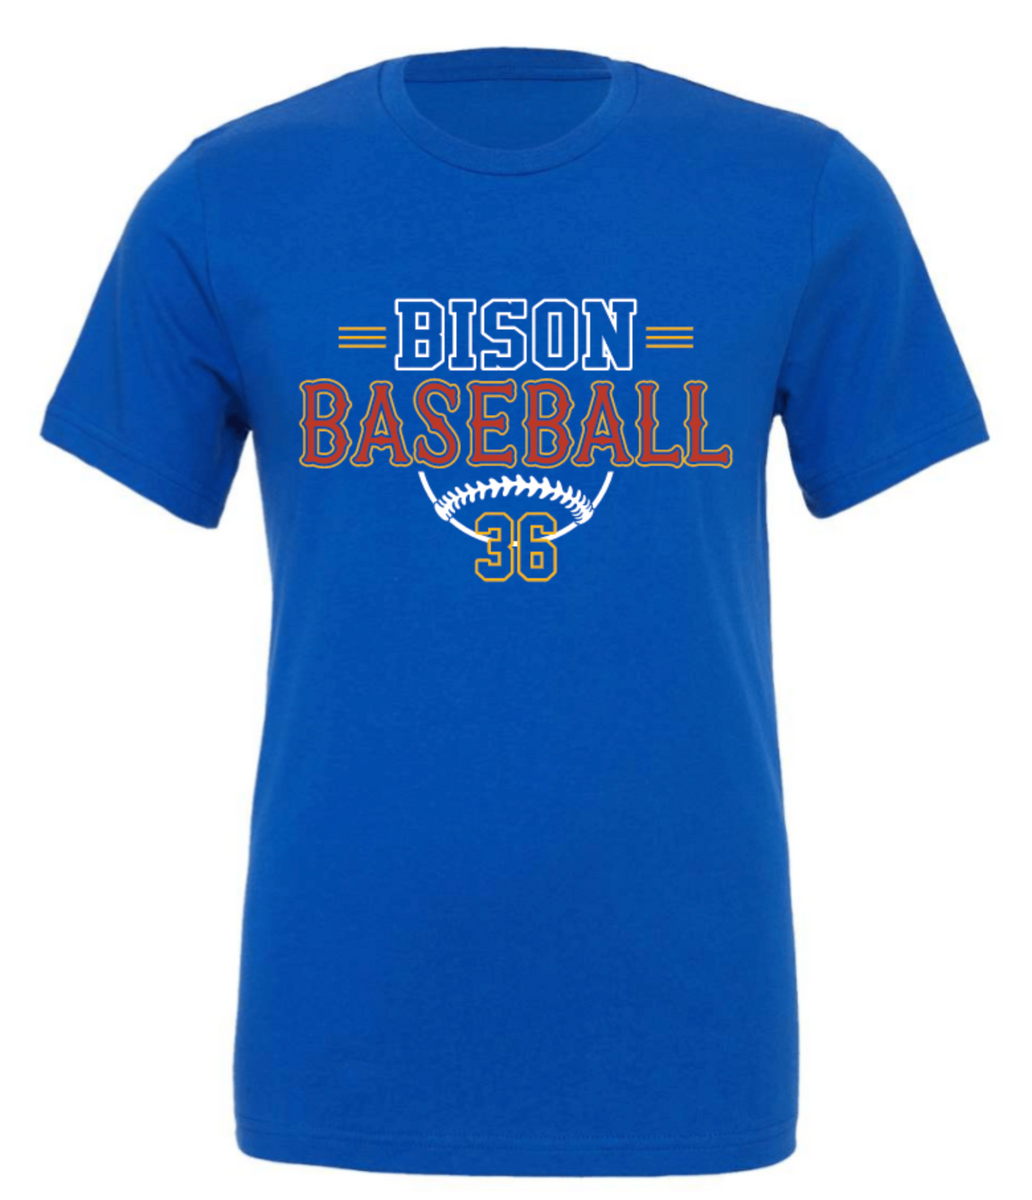 BISON BASEBALL WITH OR WITHOUT NUMBER Basic Becky Tees & More